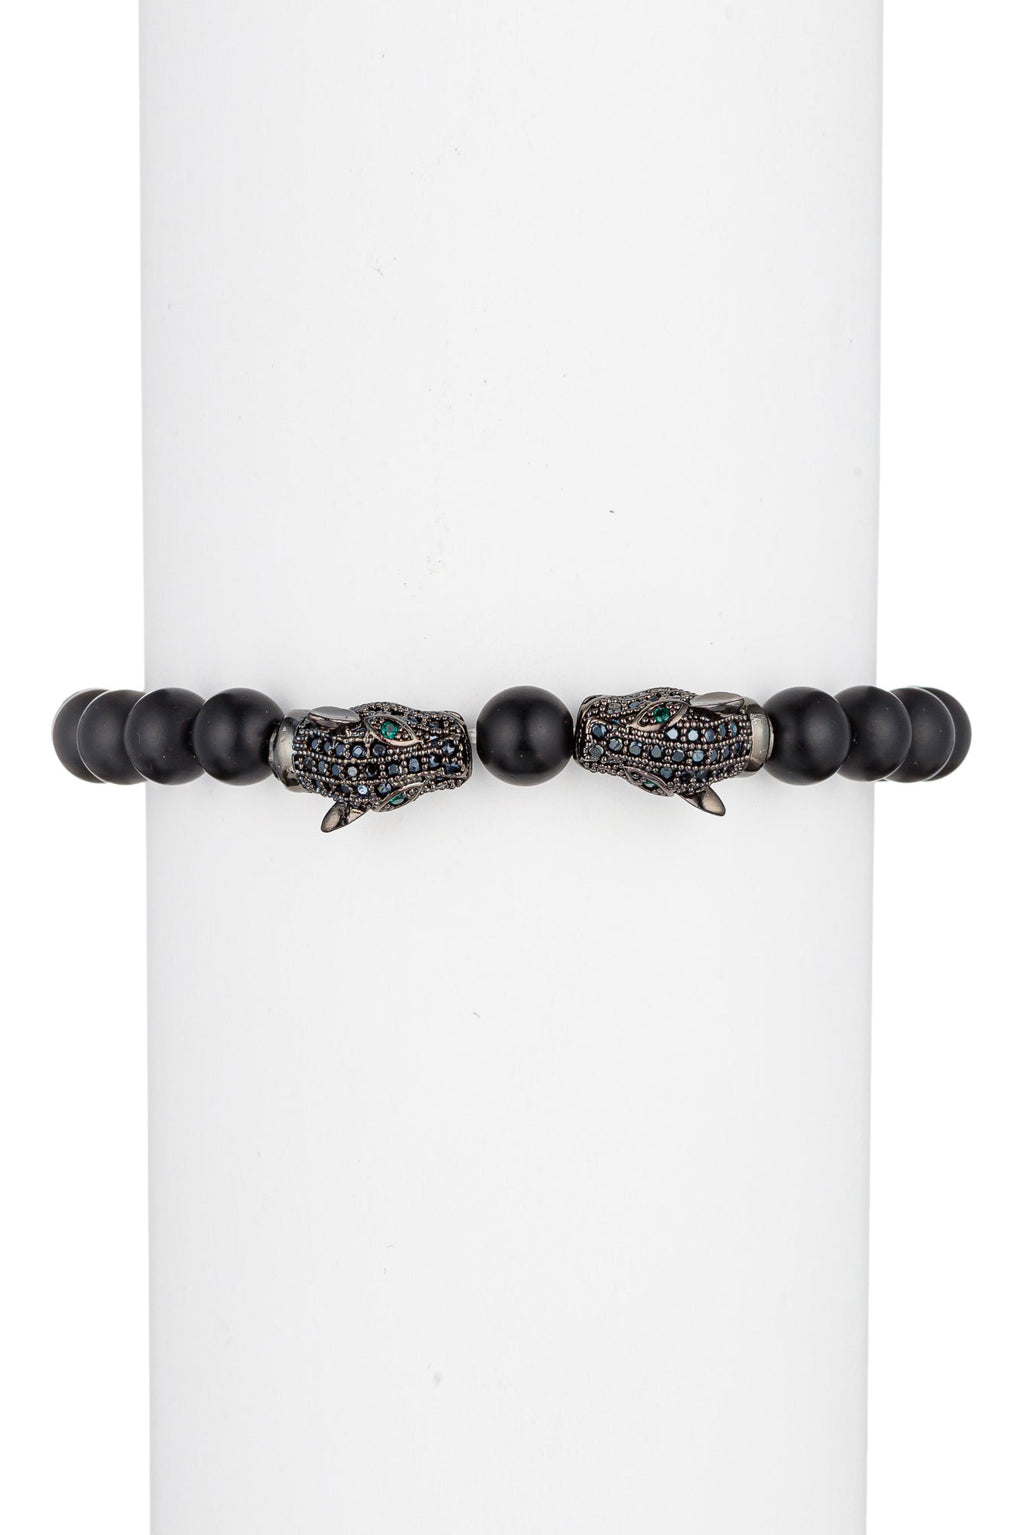 Henri Jaguar Stretch Beaded Bracelet: Unleash Your Inner Wild with This Striking Animal-Inspired Accessory.